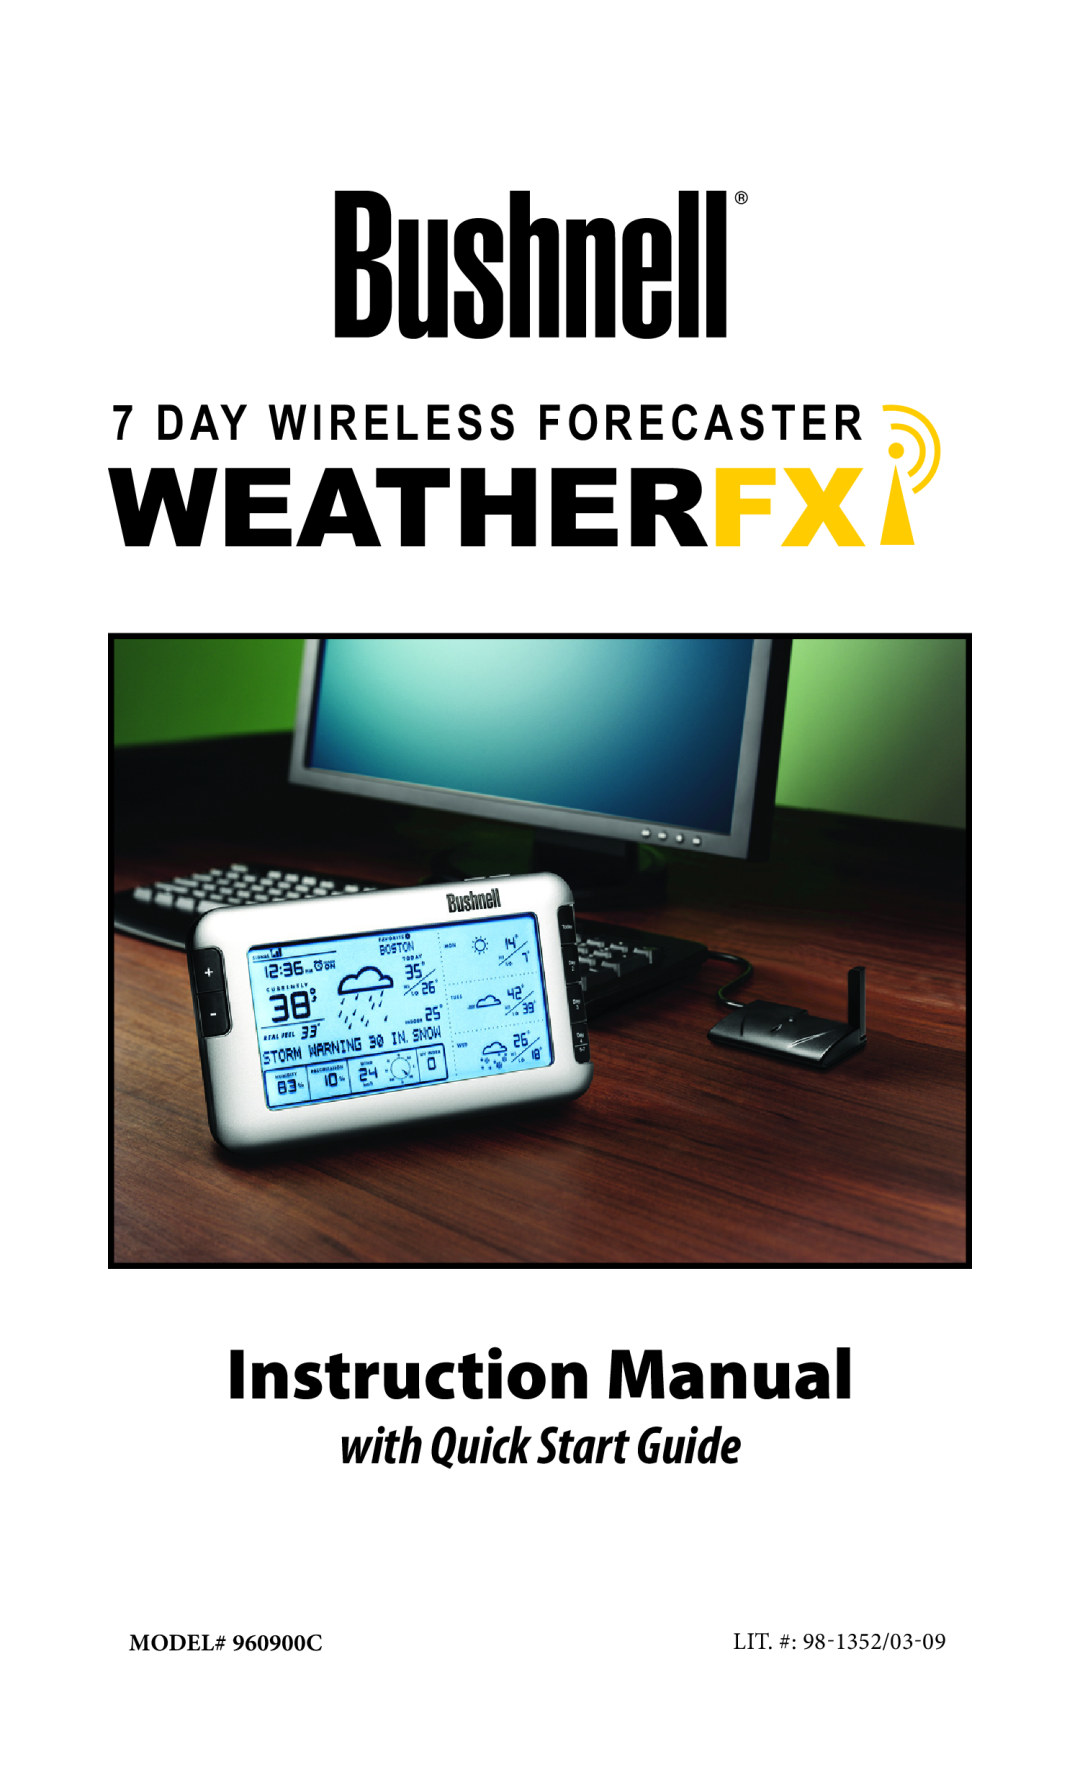 Bushnell instruction manual Weatherfx, with Quick Start Guide, Day Wireless Forecaster, Model# 960900C 